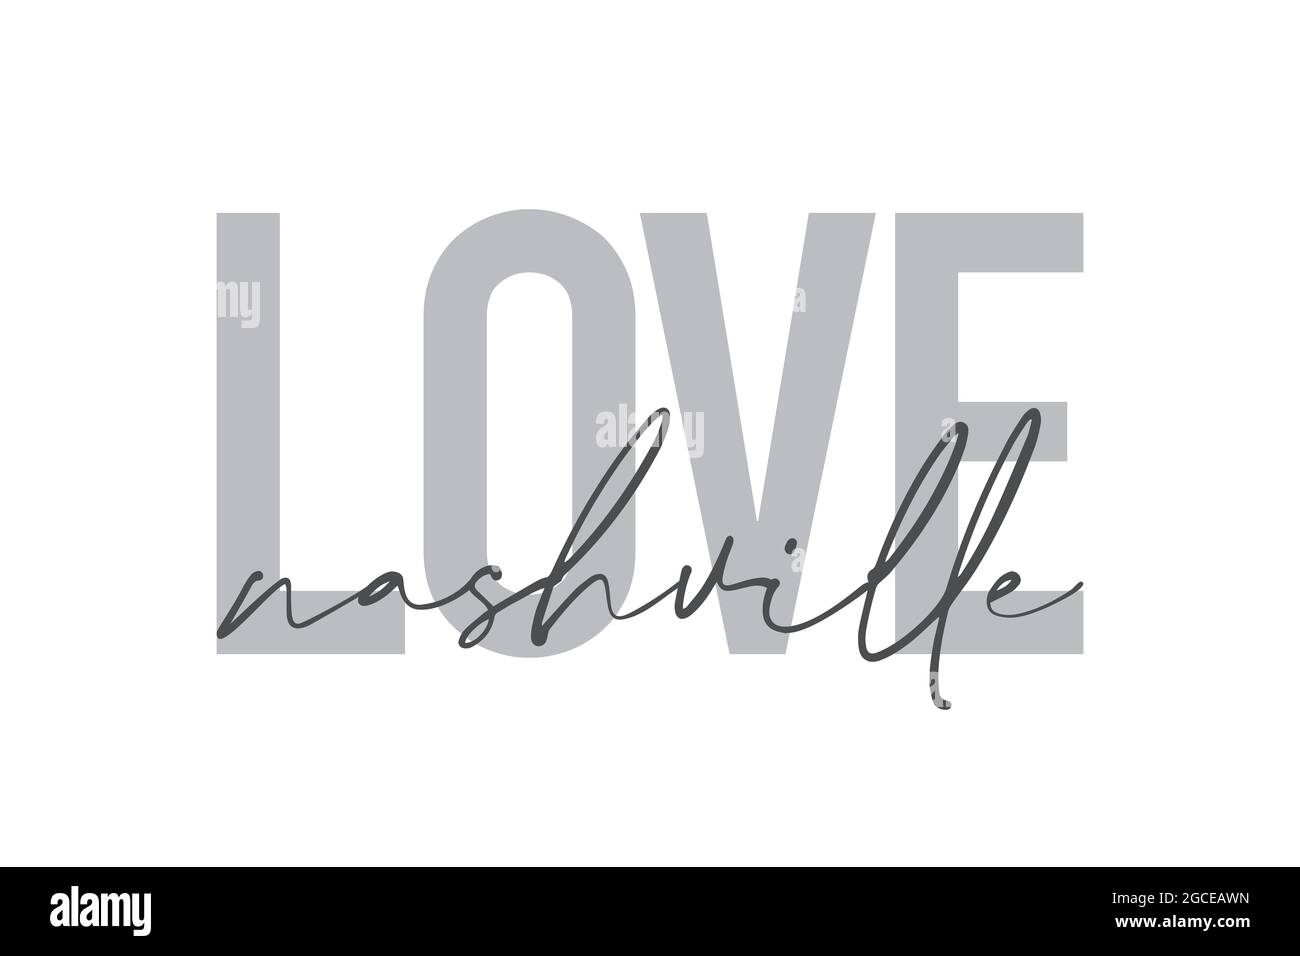 Modern, simple, minimal typographic design of a saying 'Love Nashville' in tones of grey color. Cool, urban, trendy and playful graphic vector art wit Stock Photo